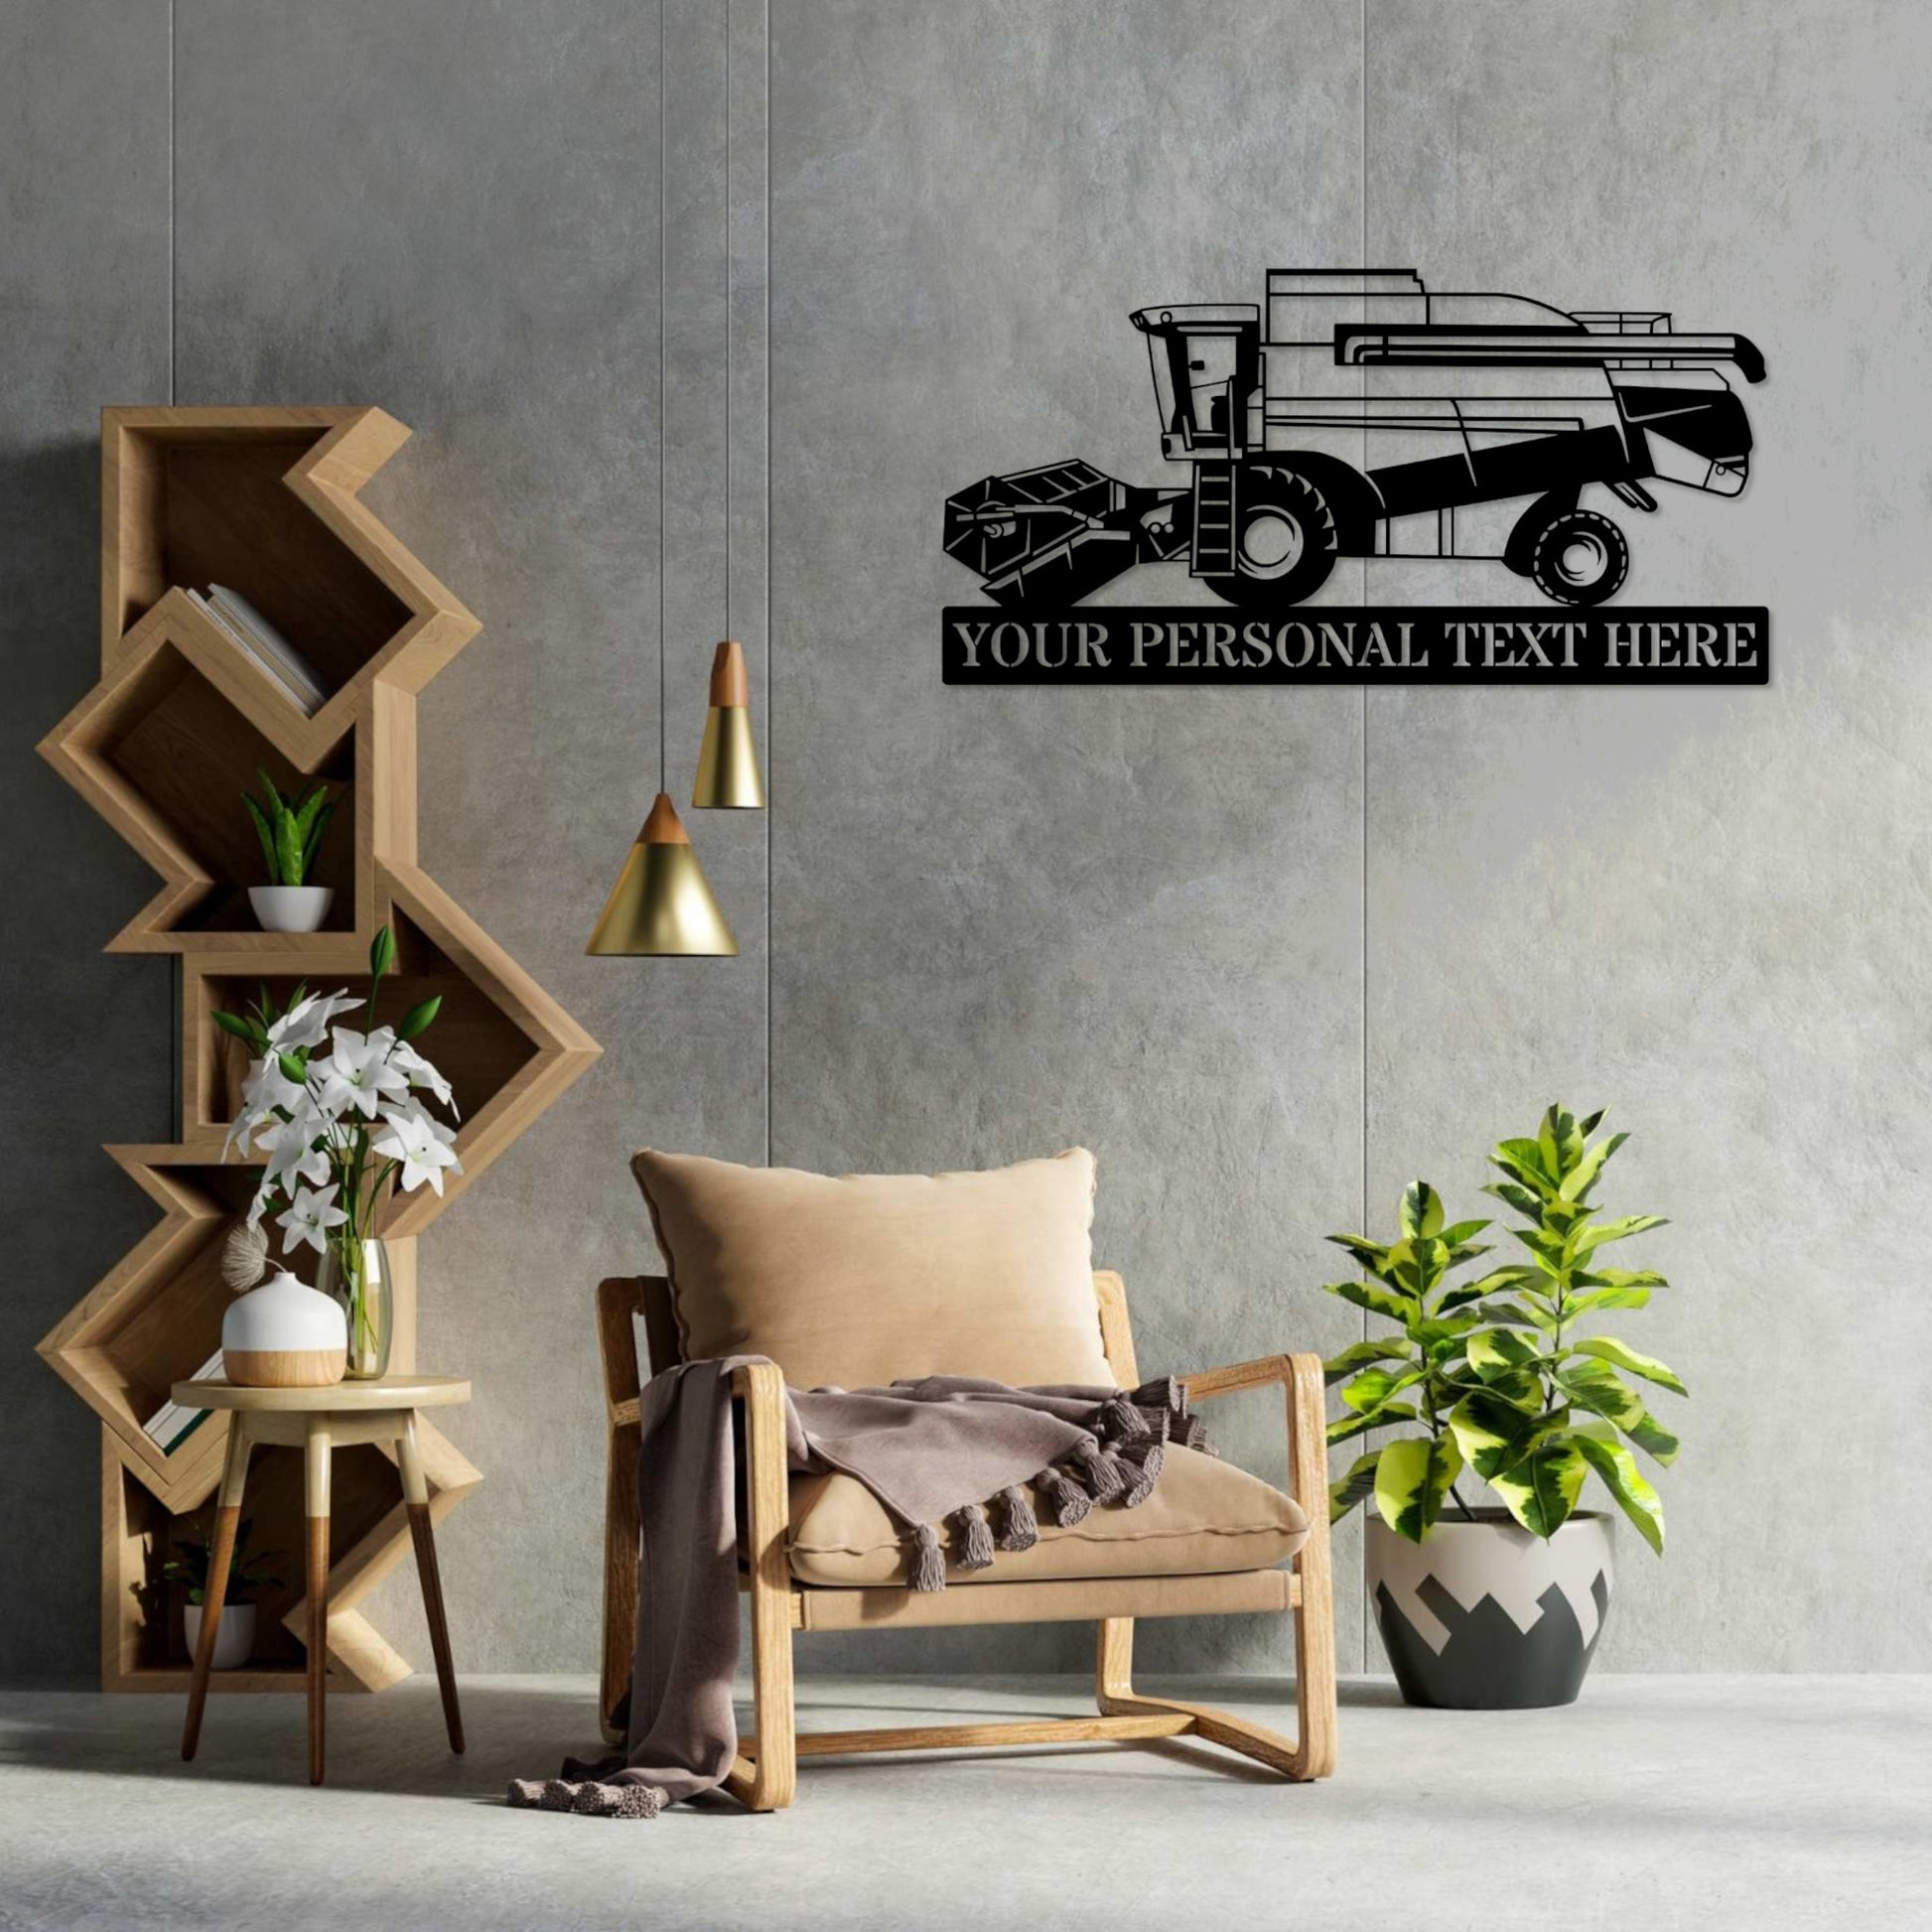 Personalized Combine Harvesting Machine Metal Sign. Custom Farm Wall Decor Gift. Farmhouse Wall Haning. Barn Decor. Agricultural Steel Sign